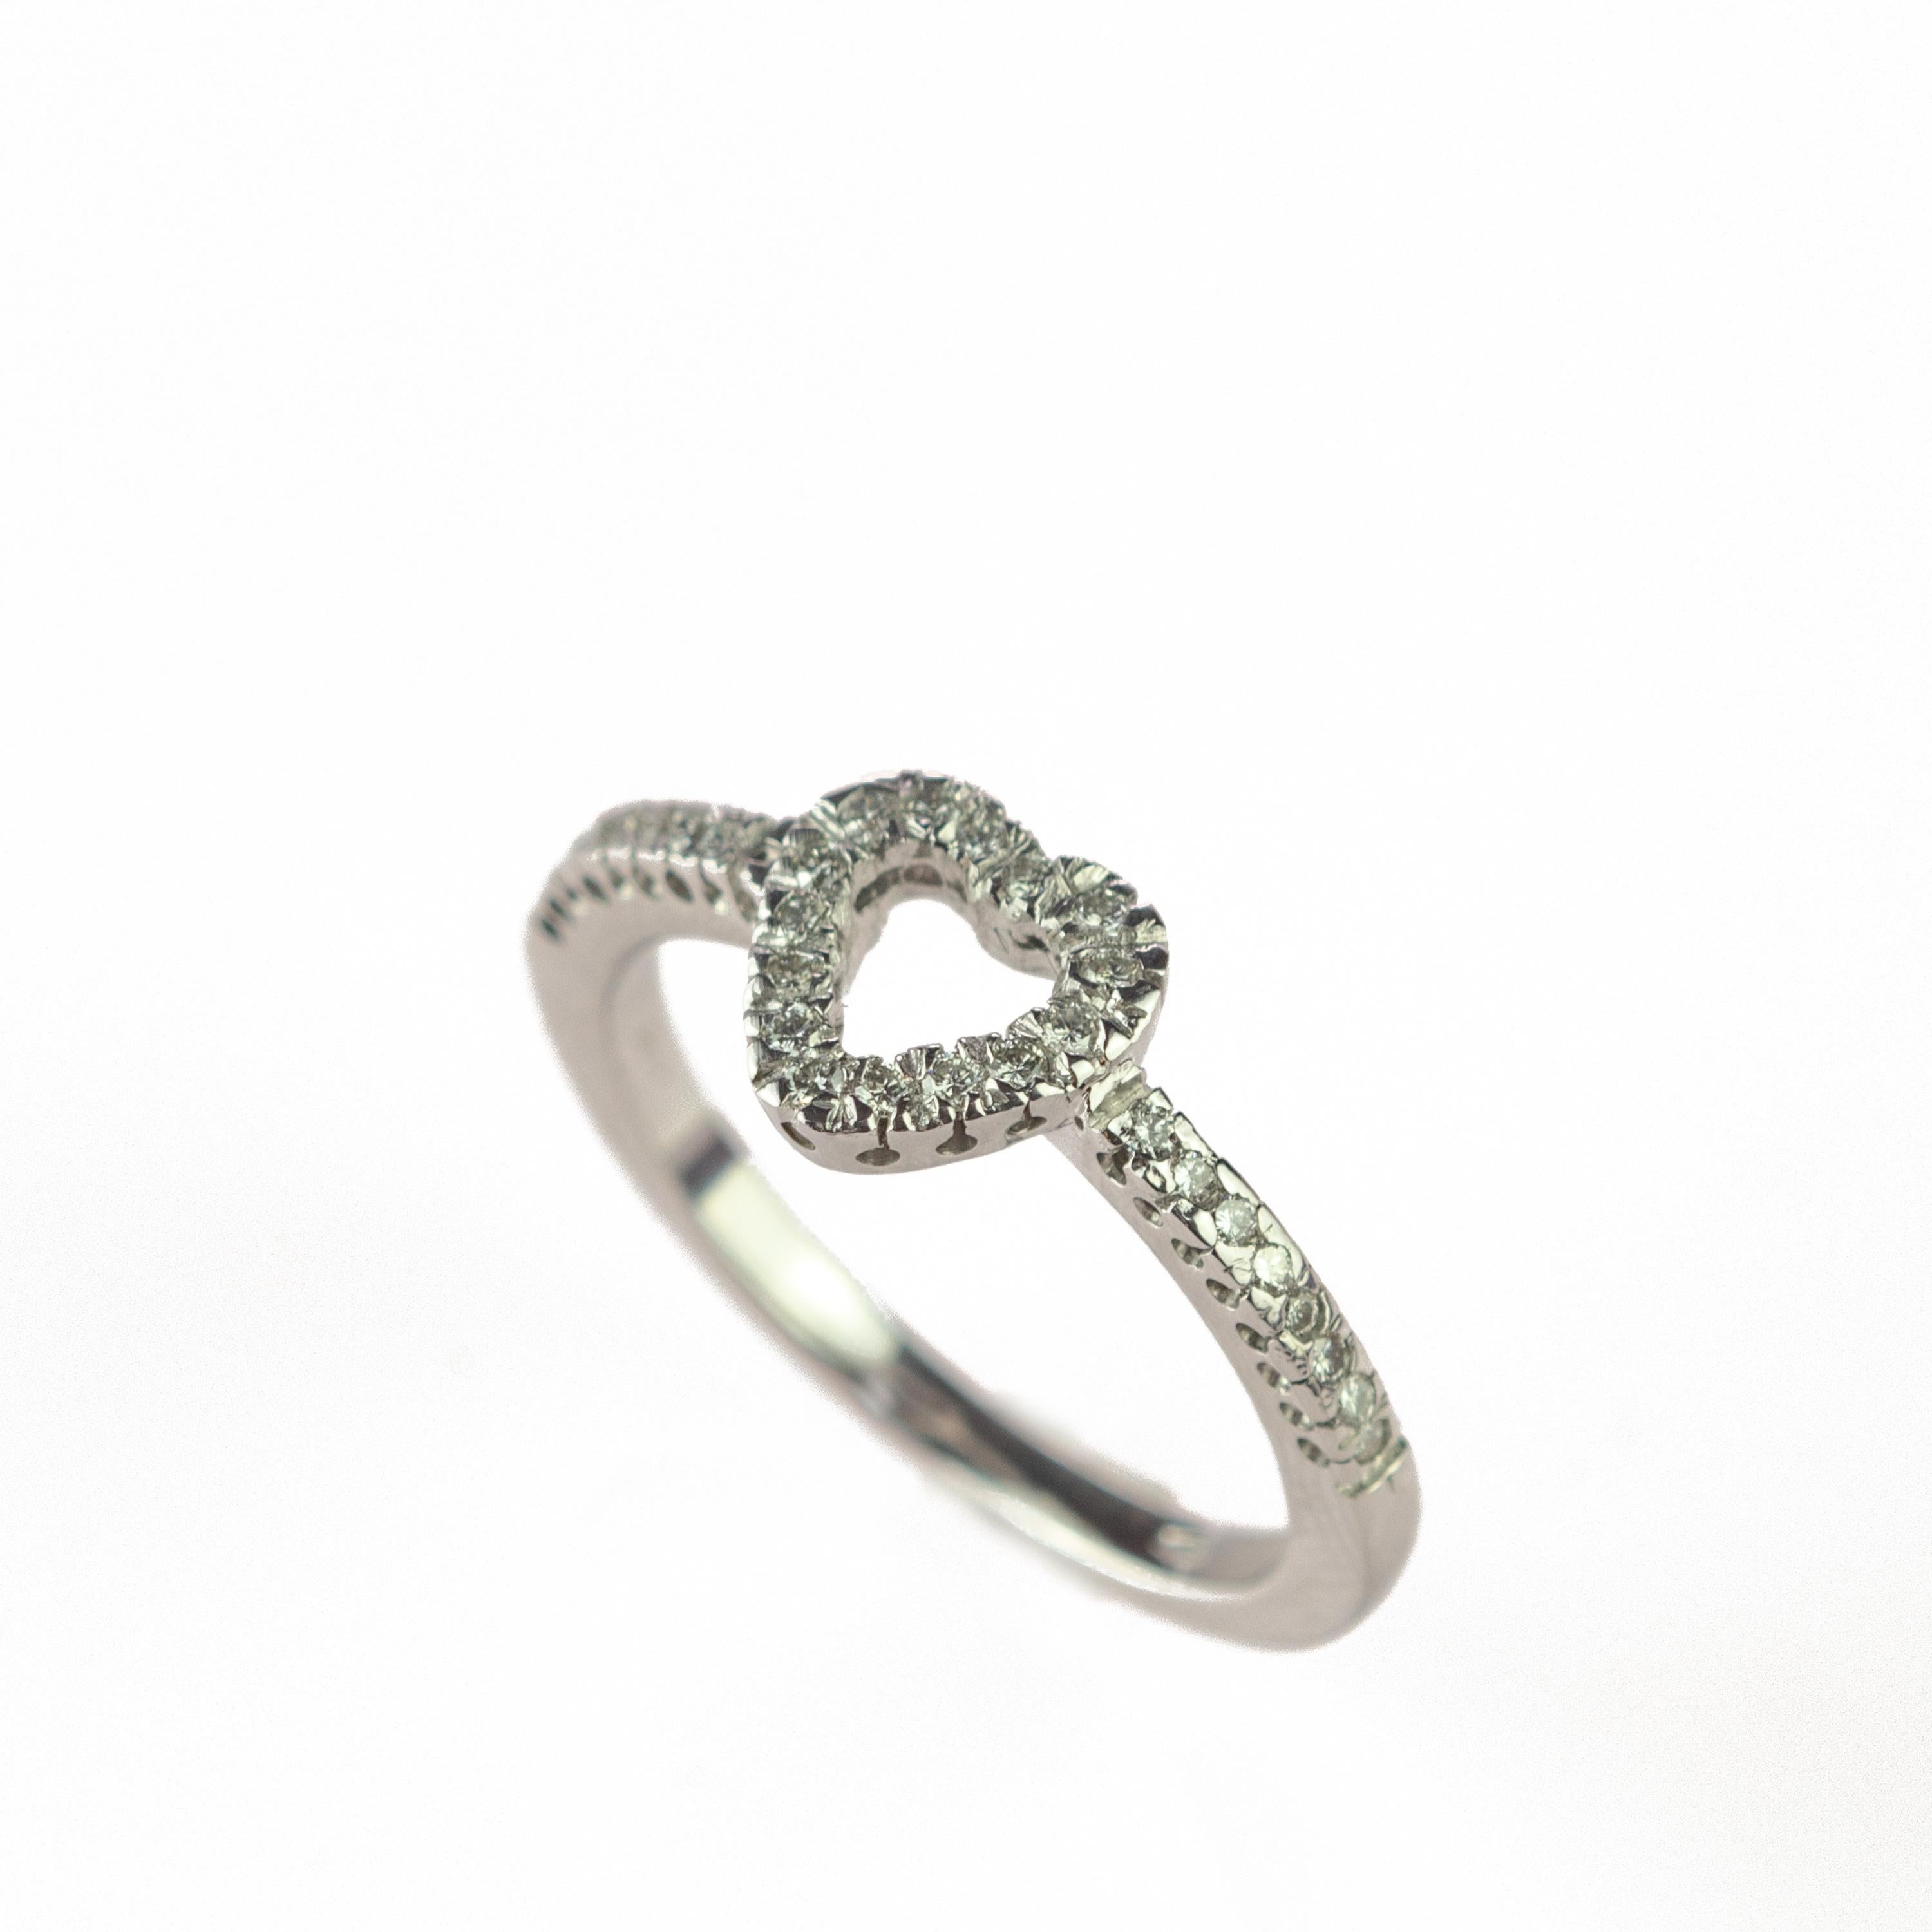 A delicate and sweet ring characterized by its diamonds that come together in a beautiful diamond heart shape embelished with 18k white gold.
 
This ring is inspired by the brilliance of its diamonds that from far away glows with light and glamour,